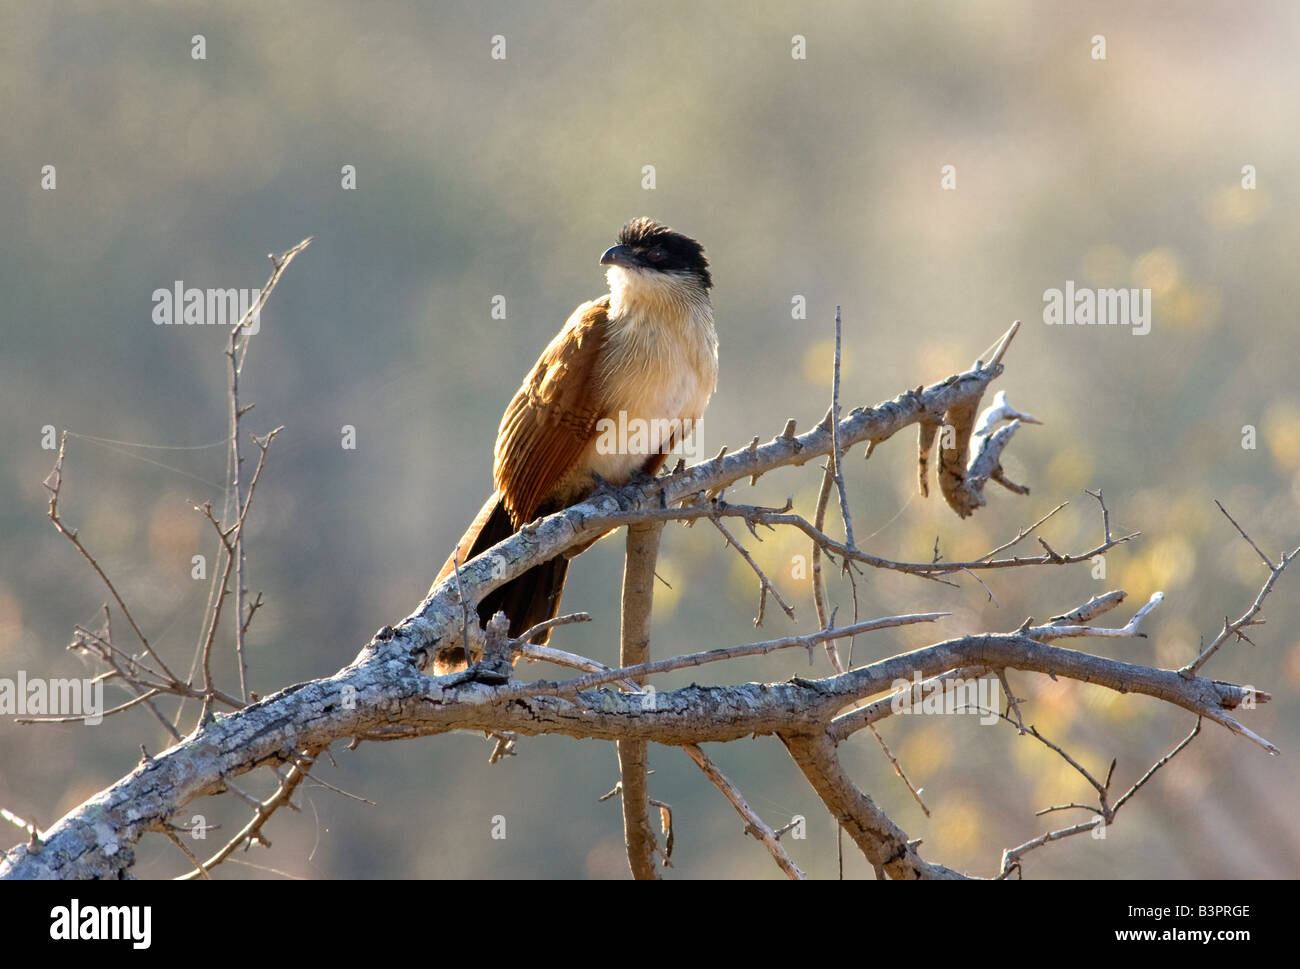 Burchell's Coucal (Centropus superciliosus), also known as the Rainbird, on tree in Kruger National Park, South Africa. Stock Photo